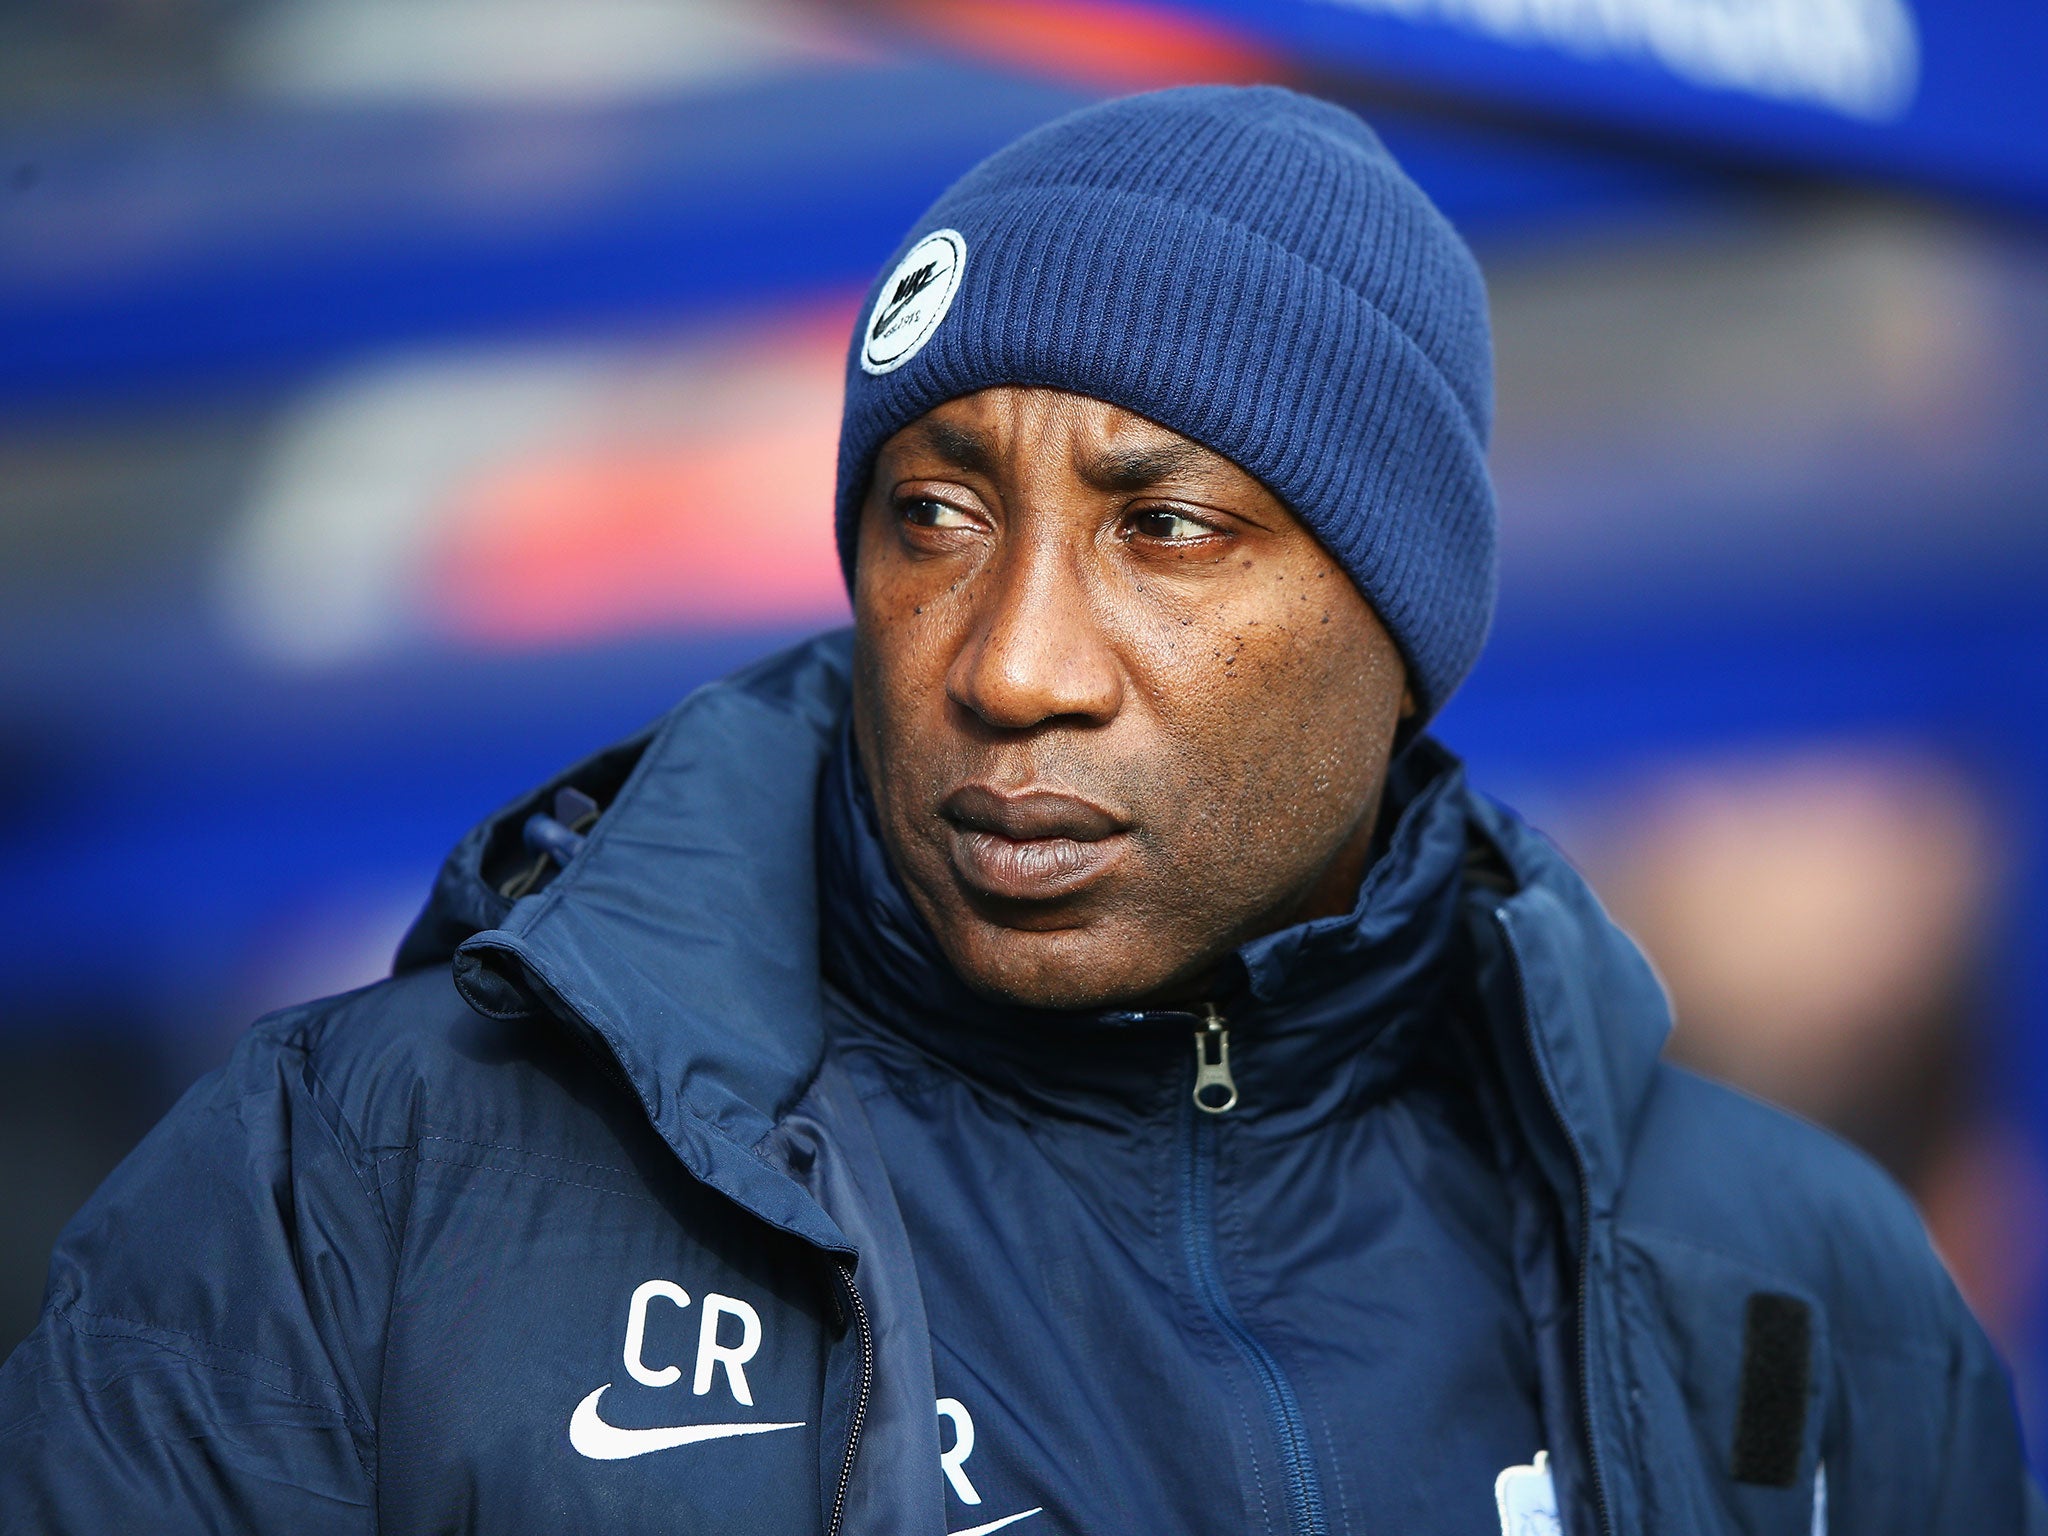 Chris Ramsey may buck the trend and keep QPR up despite becoming manager only in mid-season